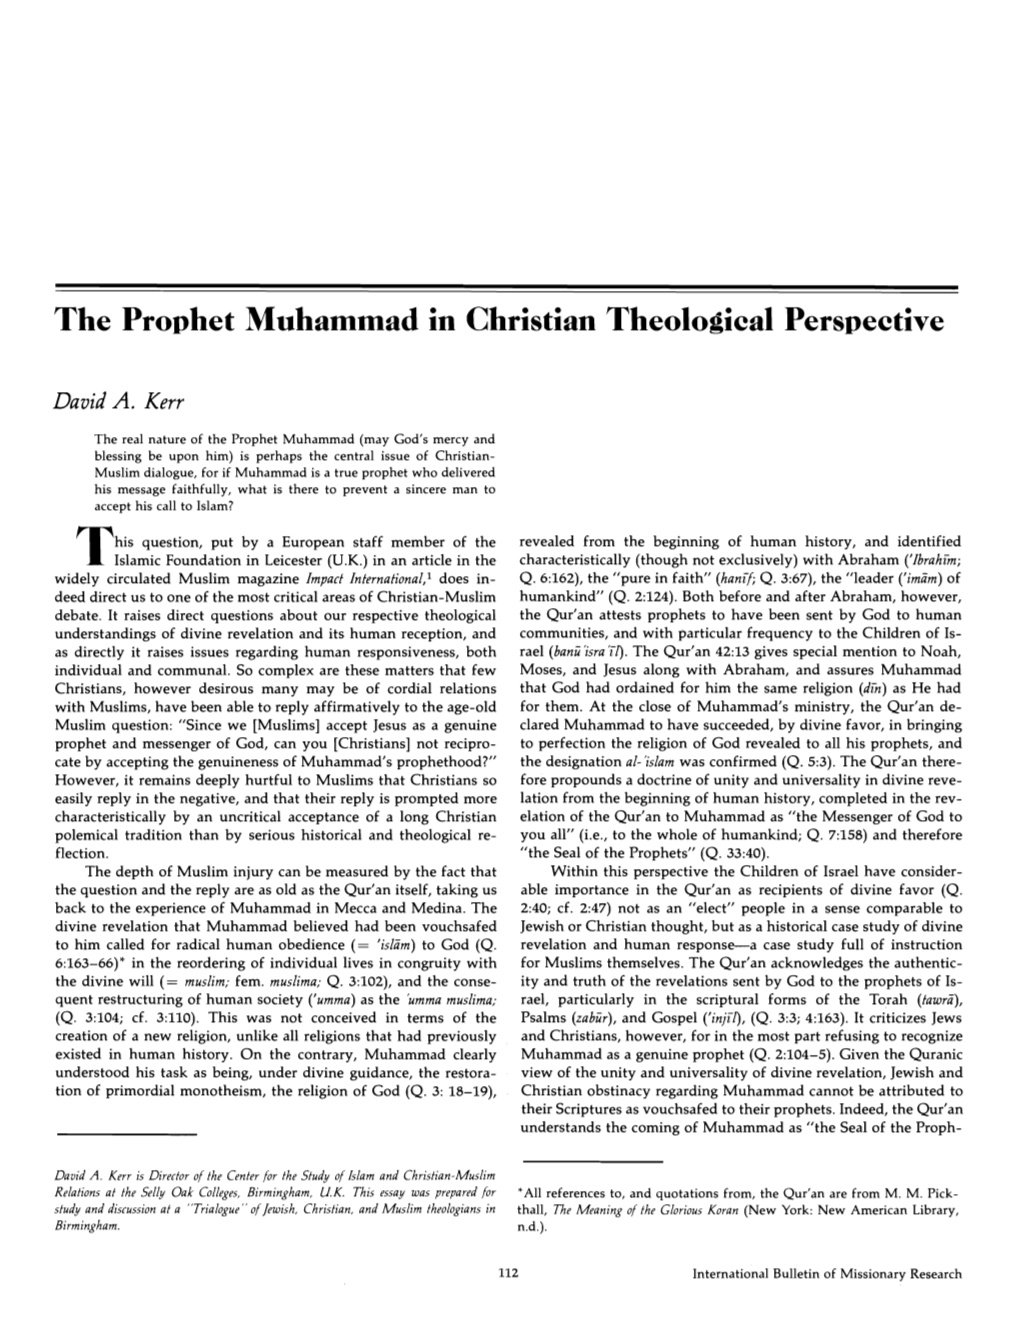 The Provhet Muhammad in Christian Theological Perspective